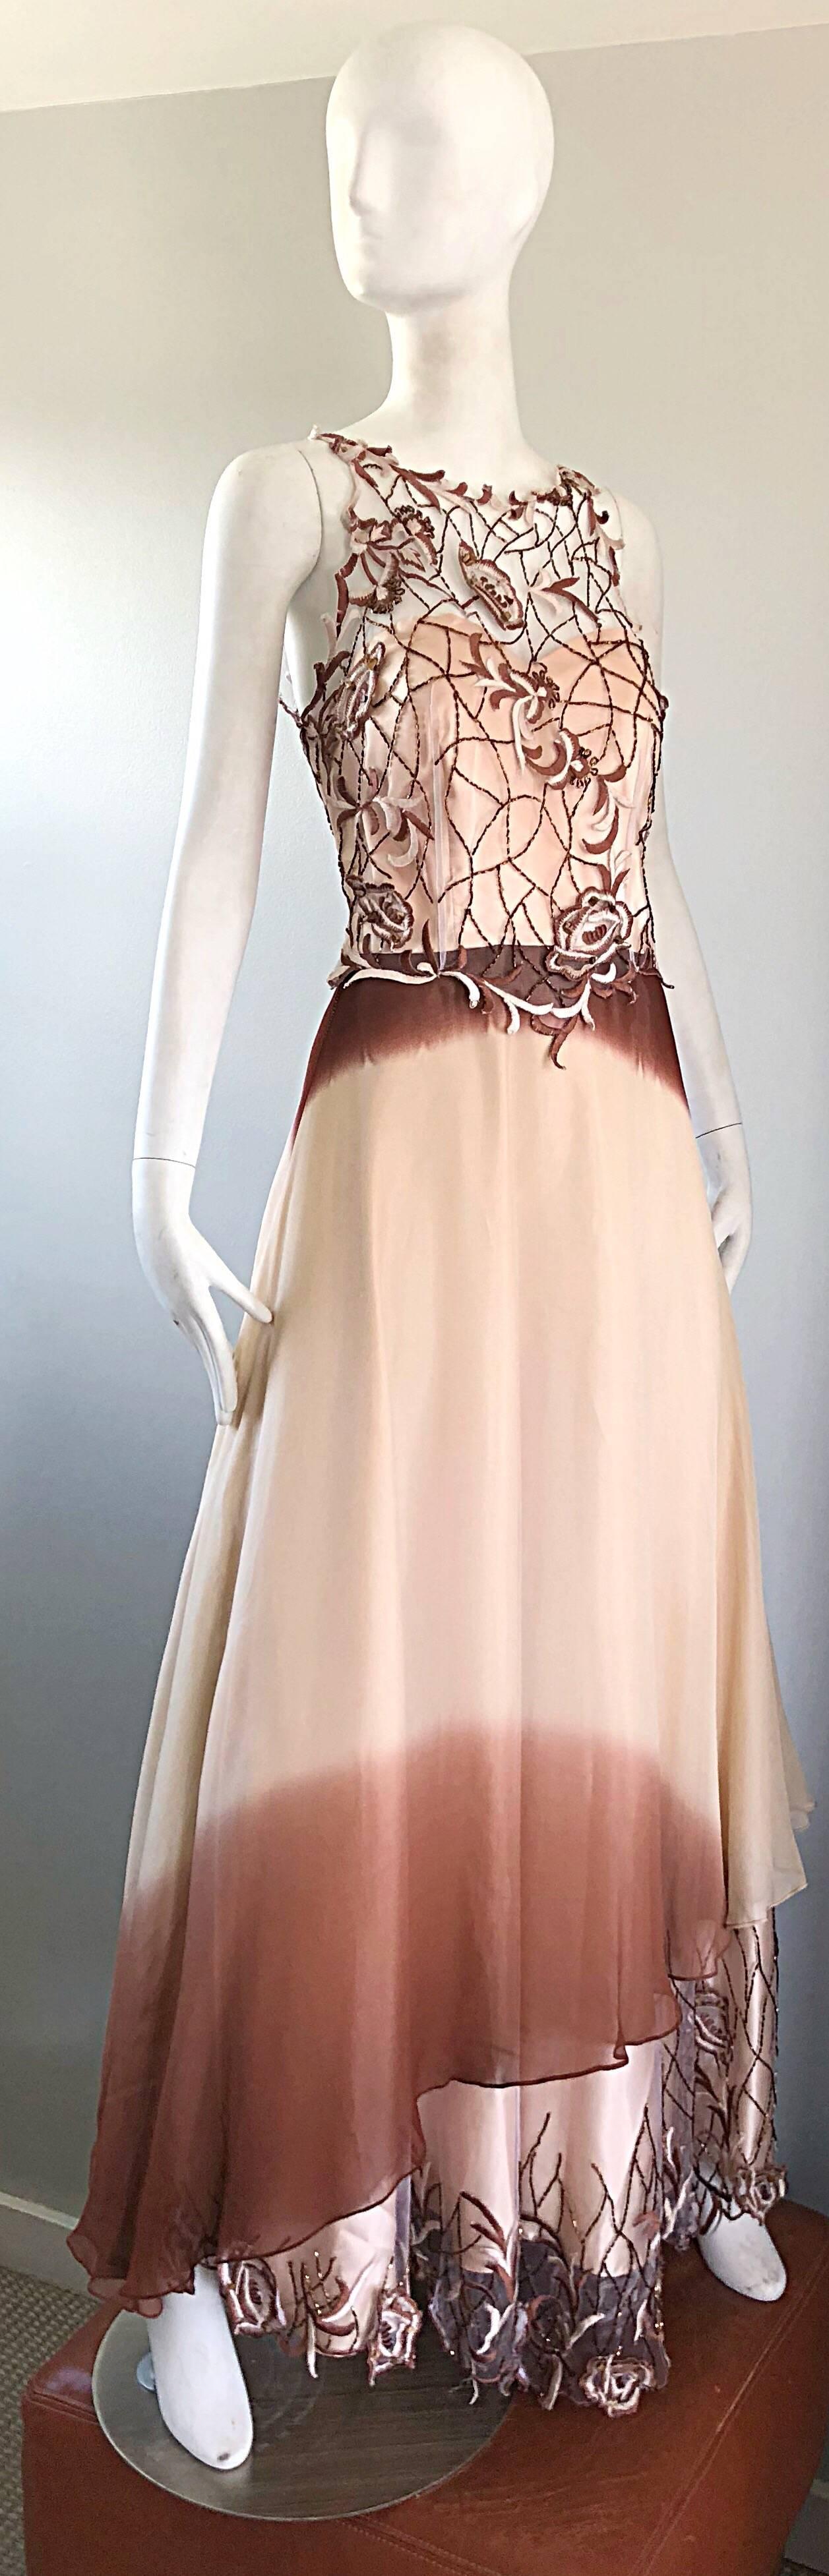 Max Nugus Haute Couture 1990s Size 6 8 Pink Brown Ombre Chiffon Vintage 90s Gown In Excellent Condition For Sale In San Diego, CA